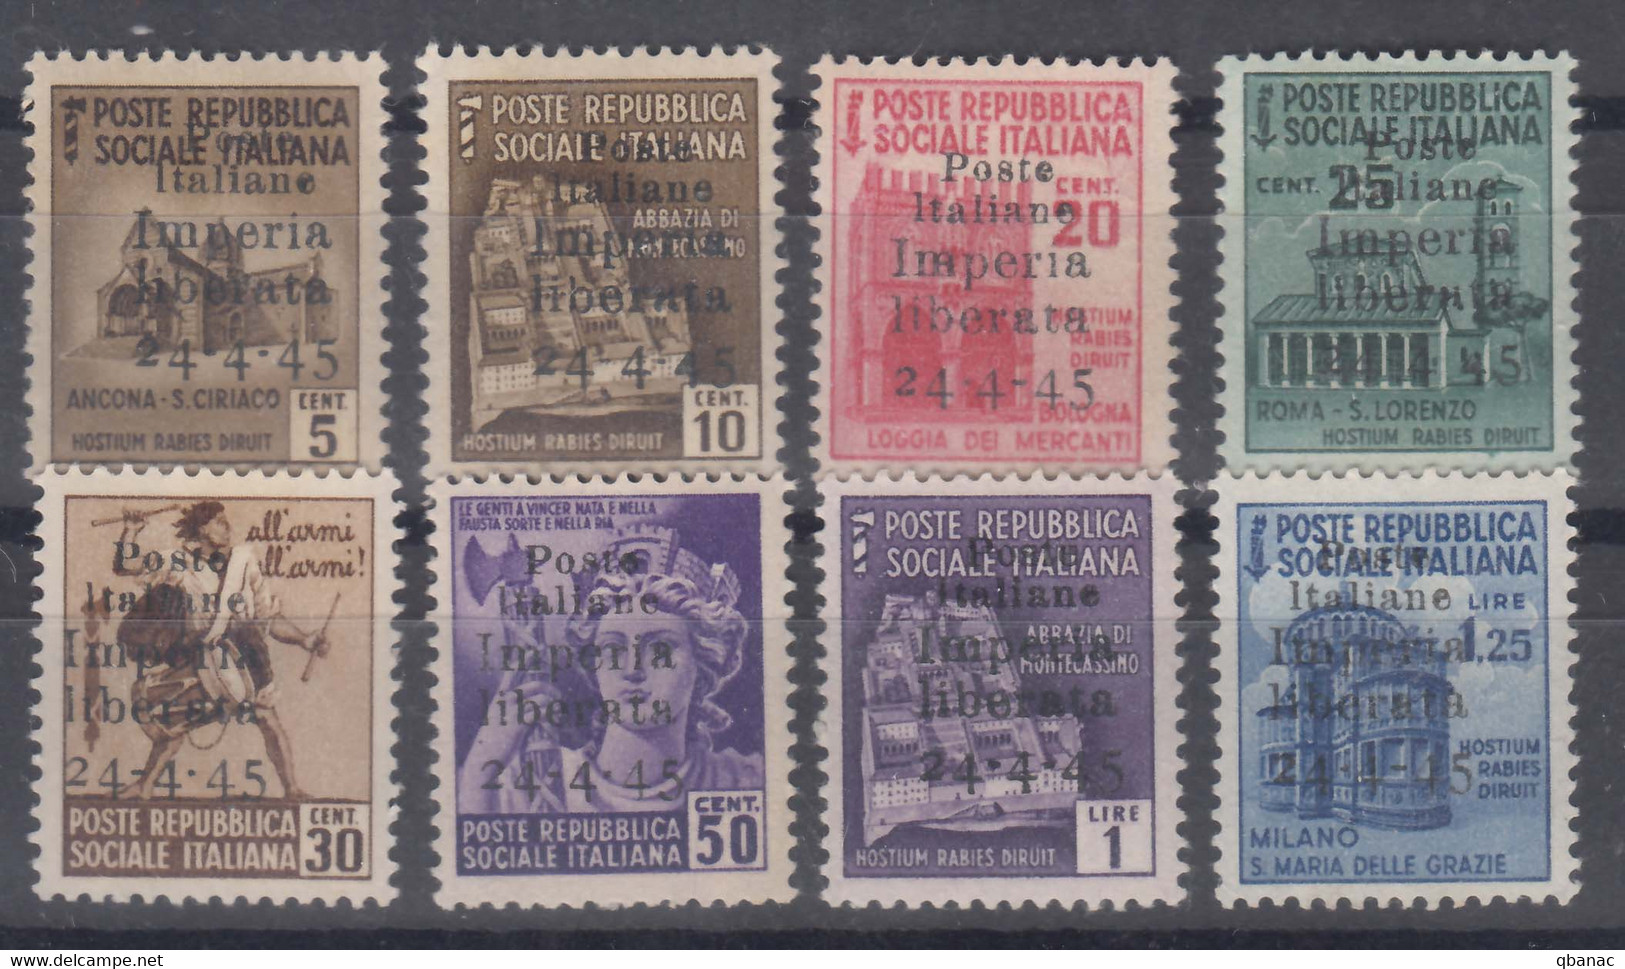 Italy C.L.N. Imperia Liberata Overprint 1945 Sassone#1,2,3,4,5,6,8,9 Mint Never Hinged - National Liberation Committee (CLN)